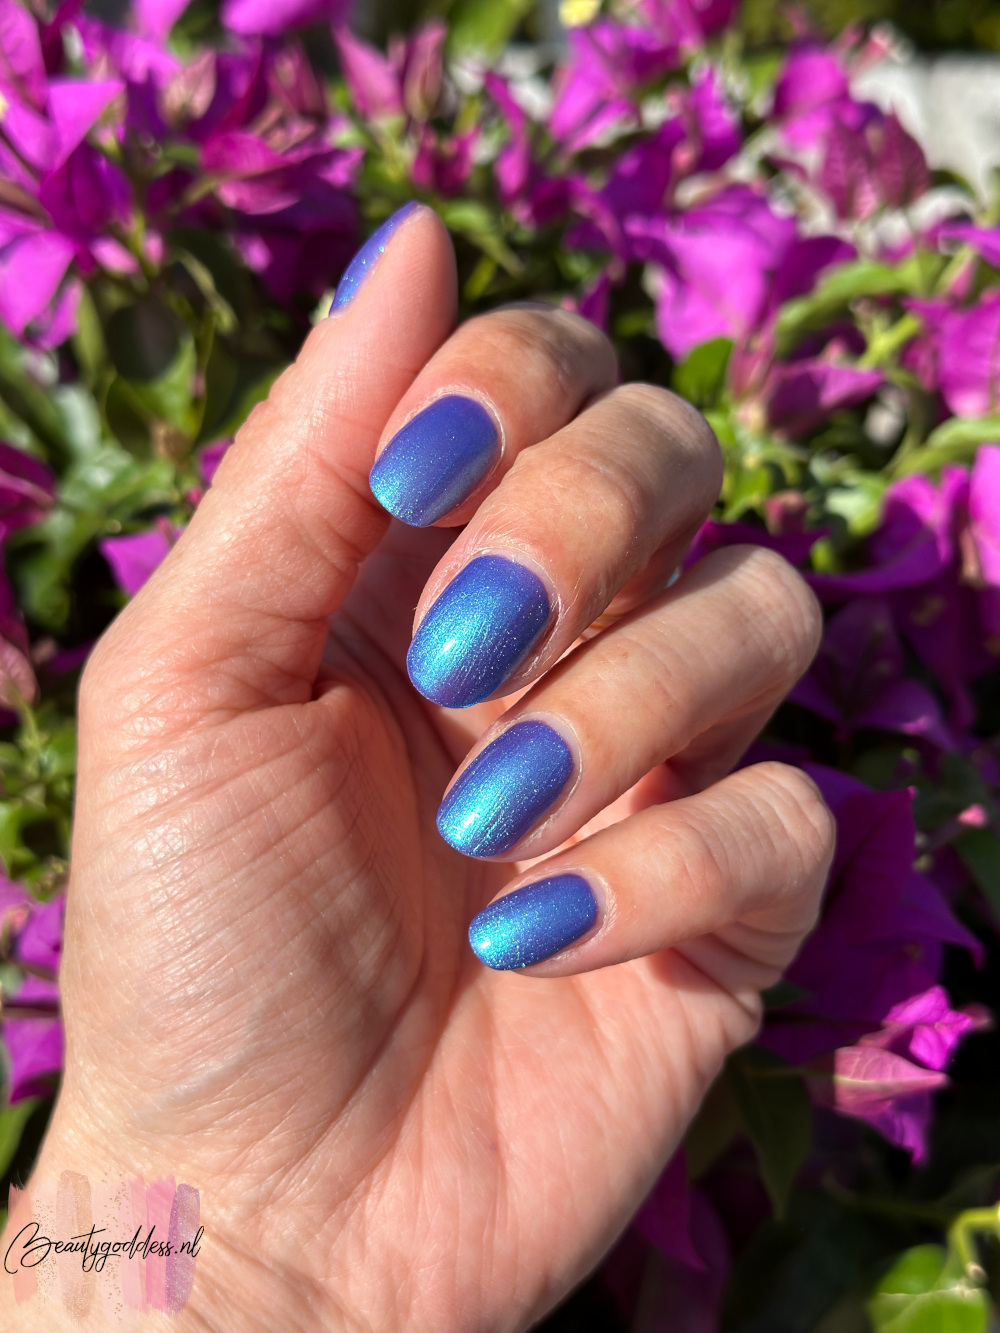 ORLY Glass act